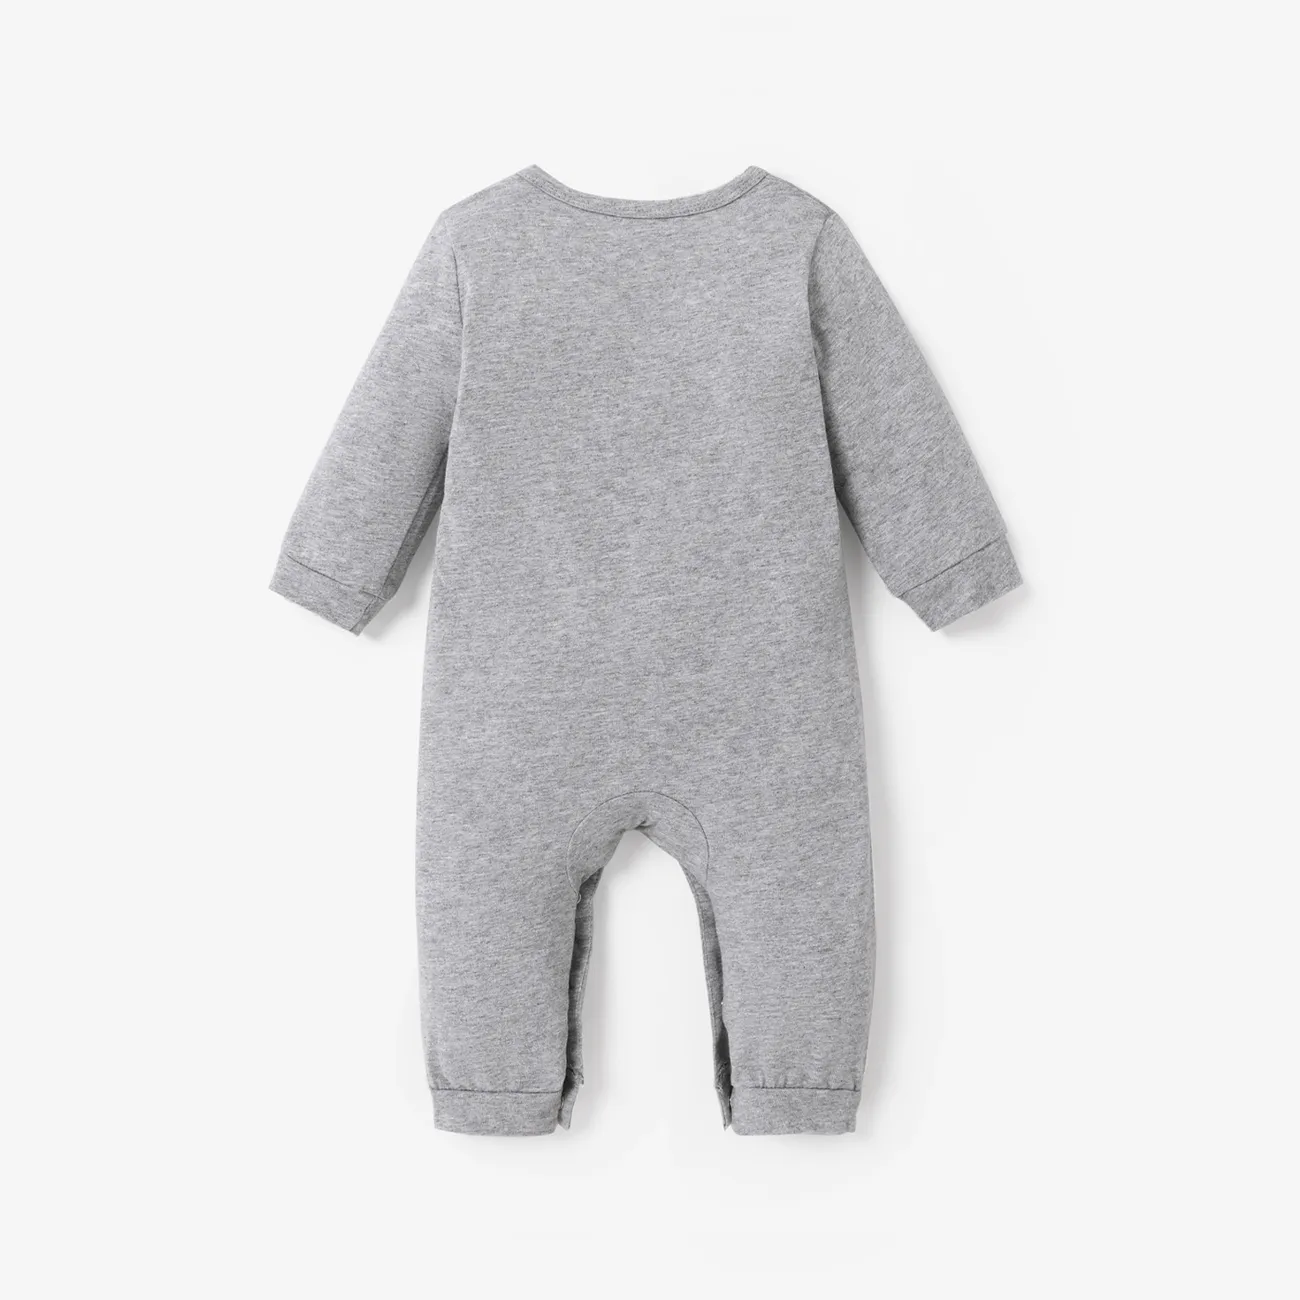 100% Cotton Letter and Heart Print Long-sleeve Gery Baby Jumpsuit Grey big image 1